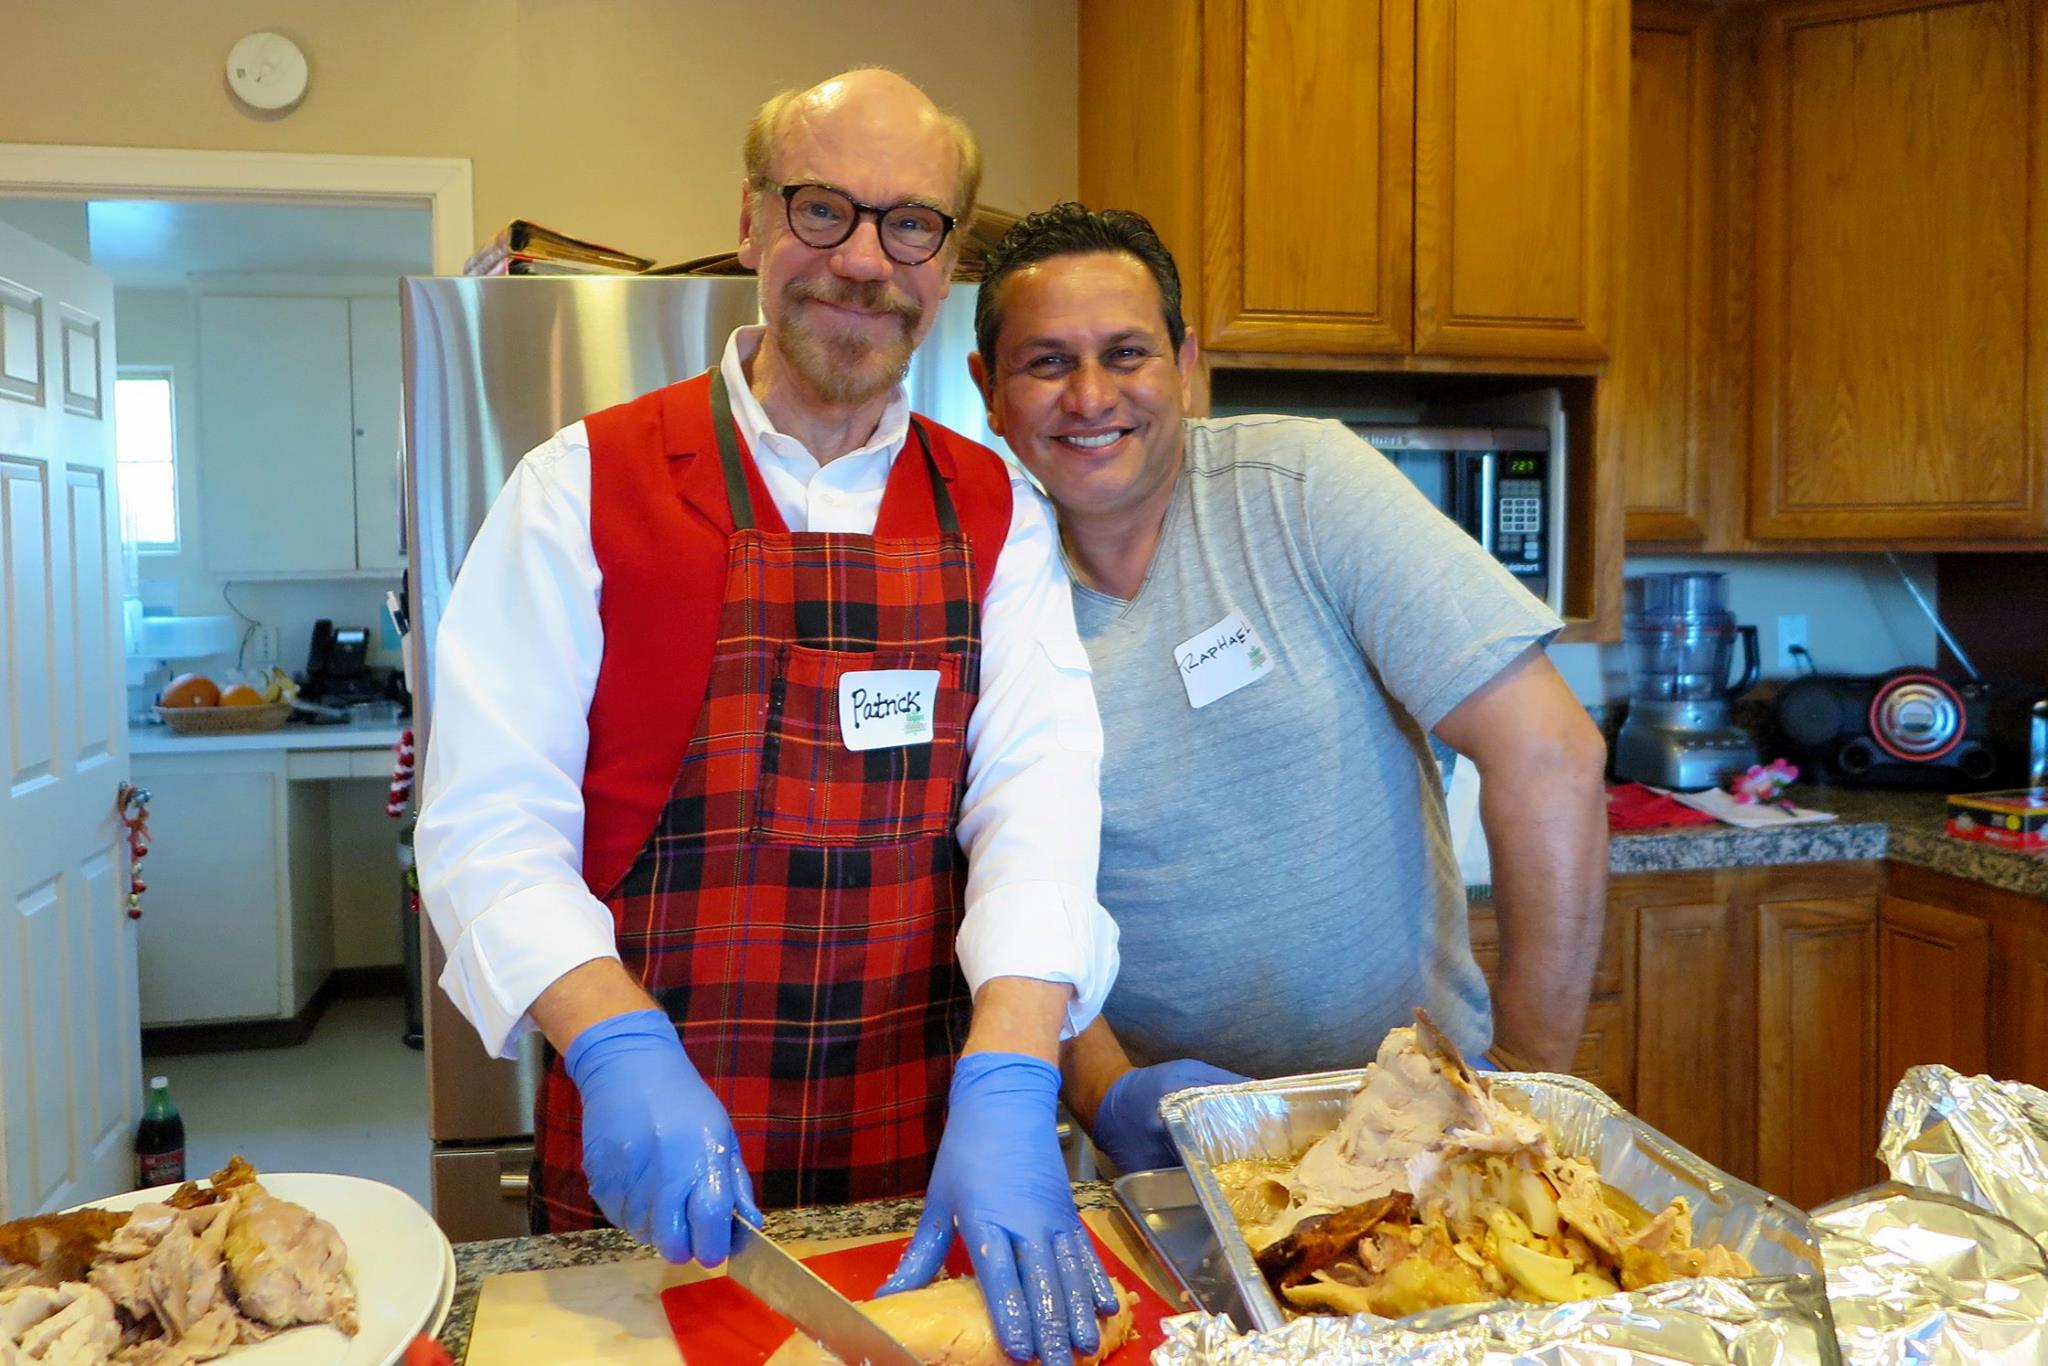 Bring & Serve Dinner for 8 residents at Fraternity House for AIDS/HIV Patients - Wednesday Nights